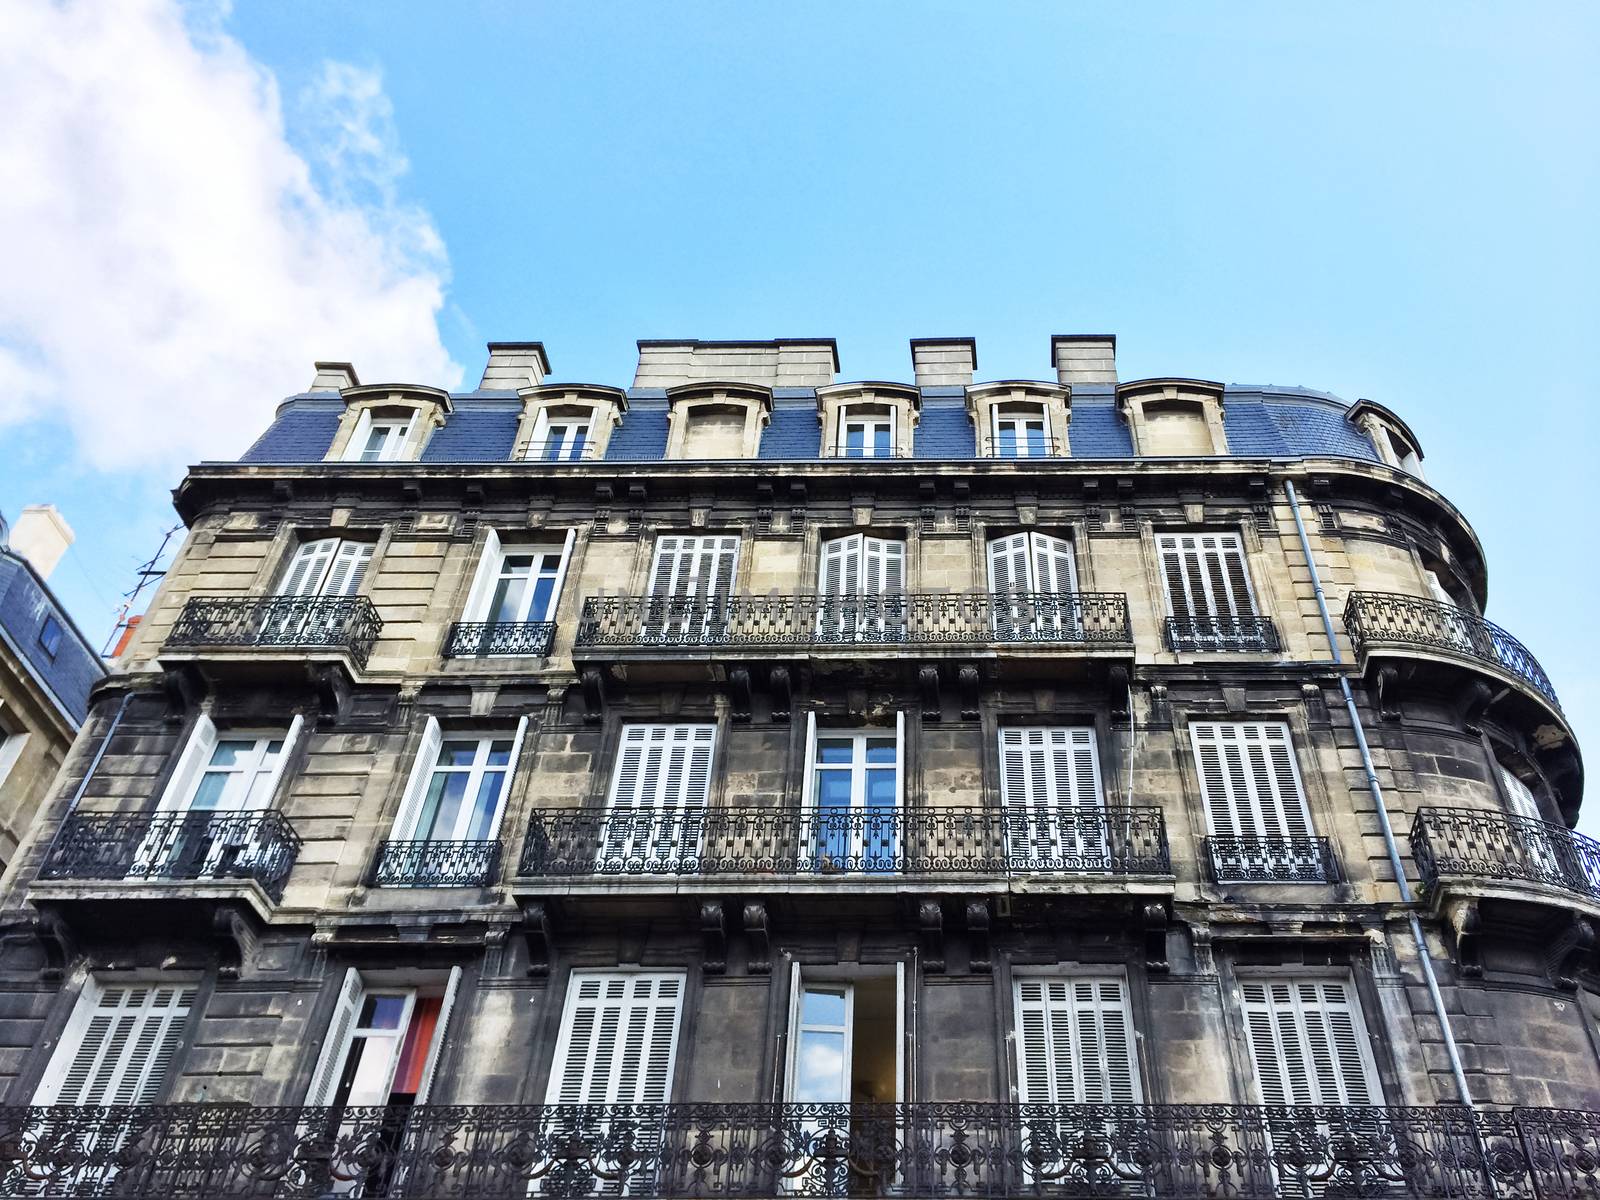 Old residential building in Bordeaux, France by anikasalsera